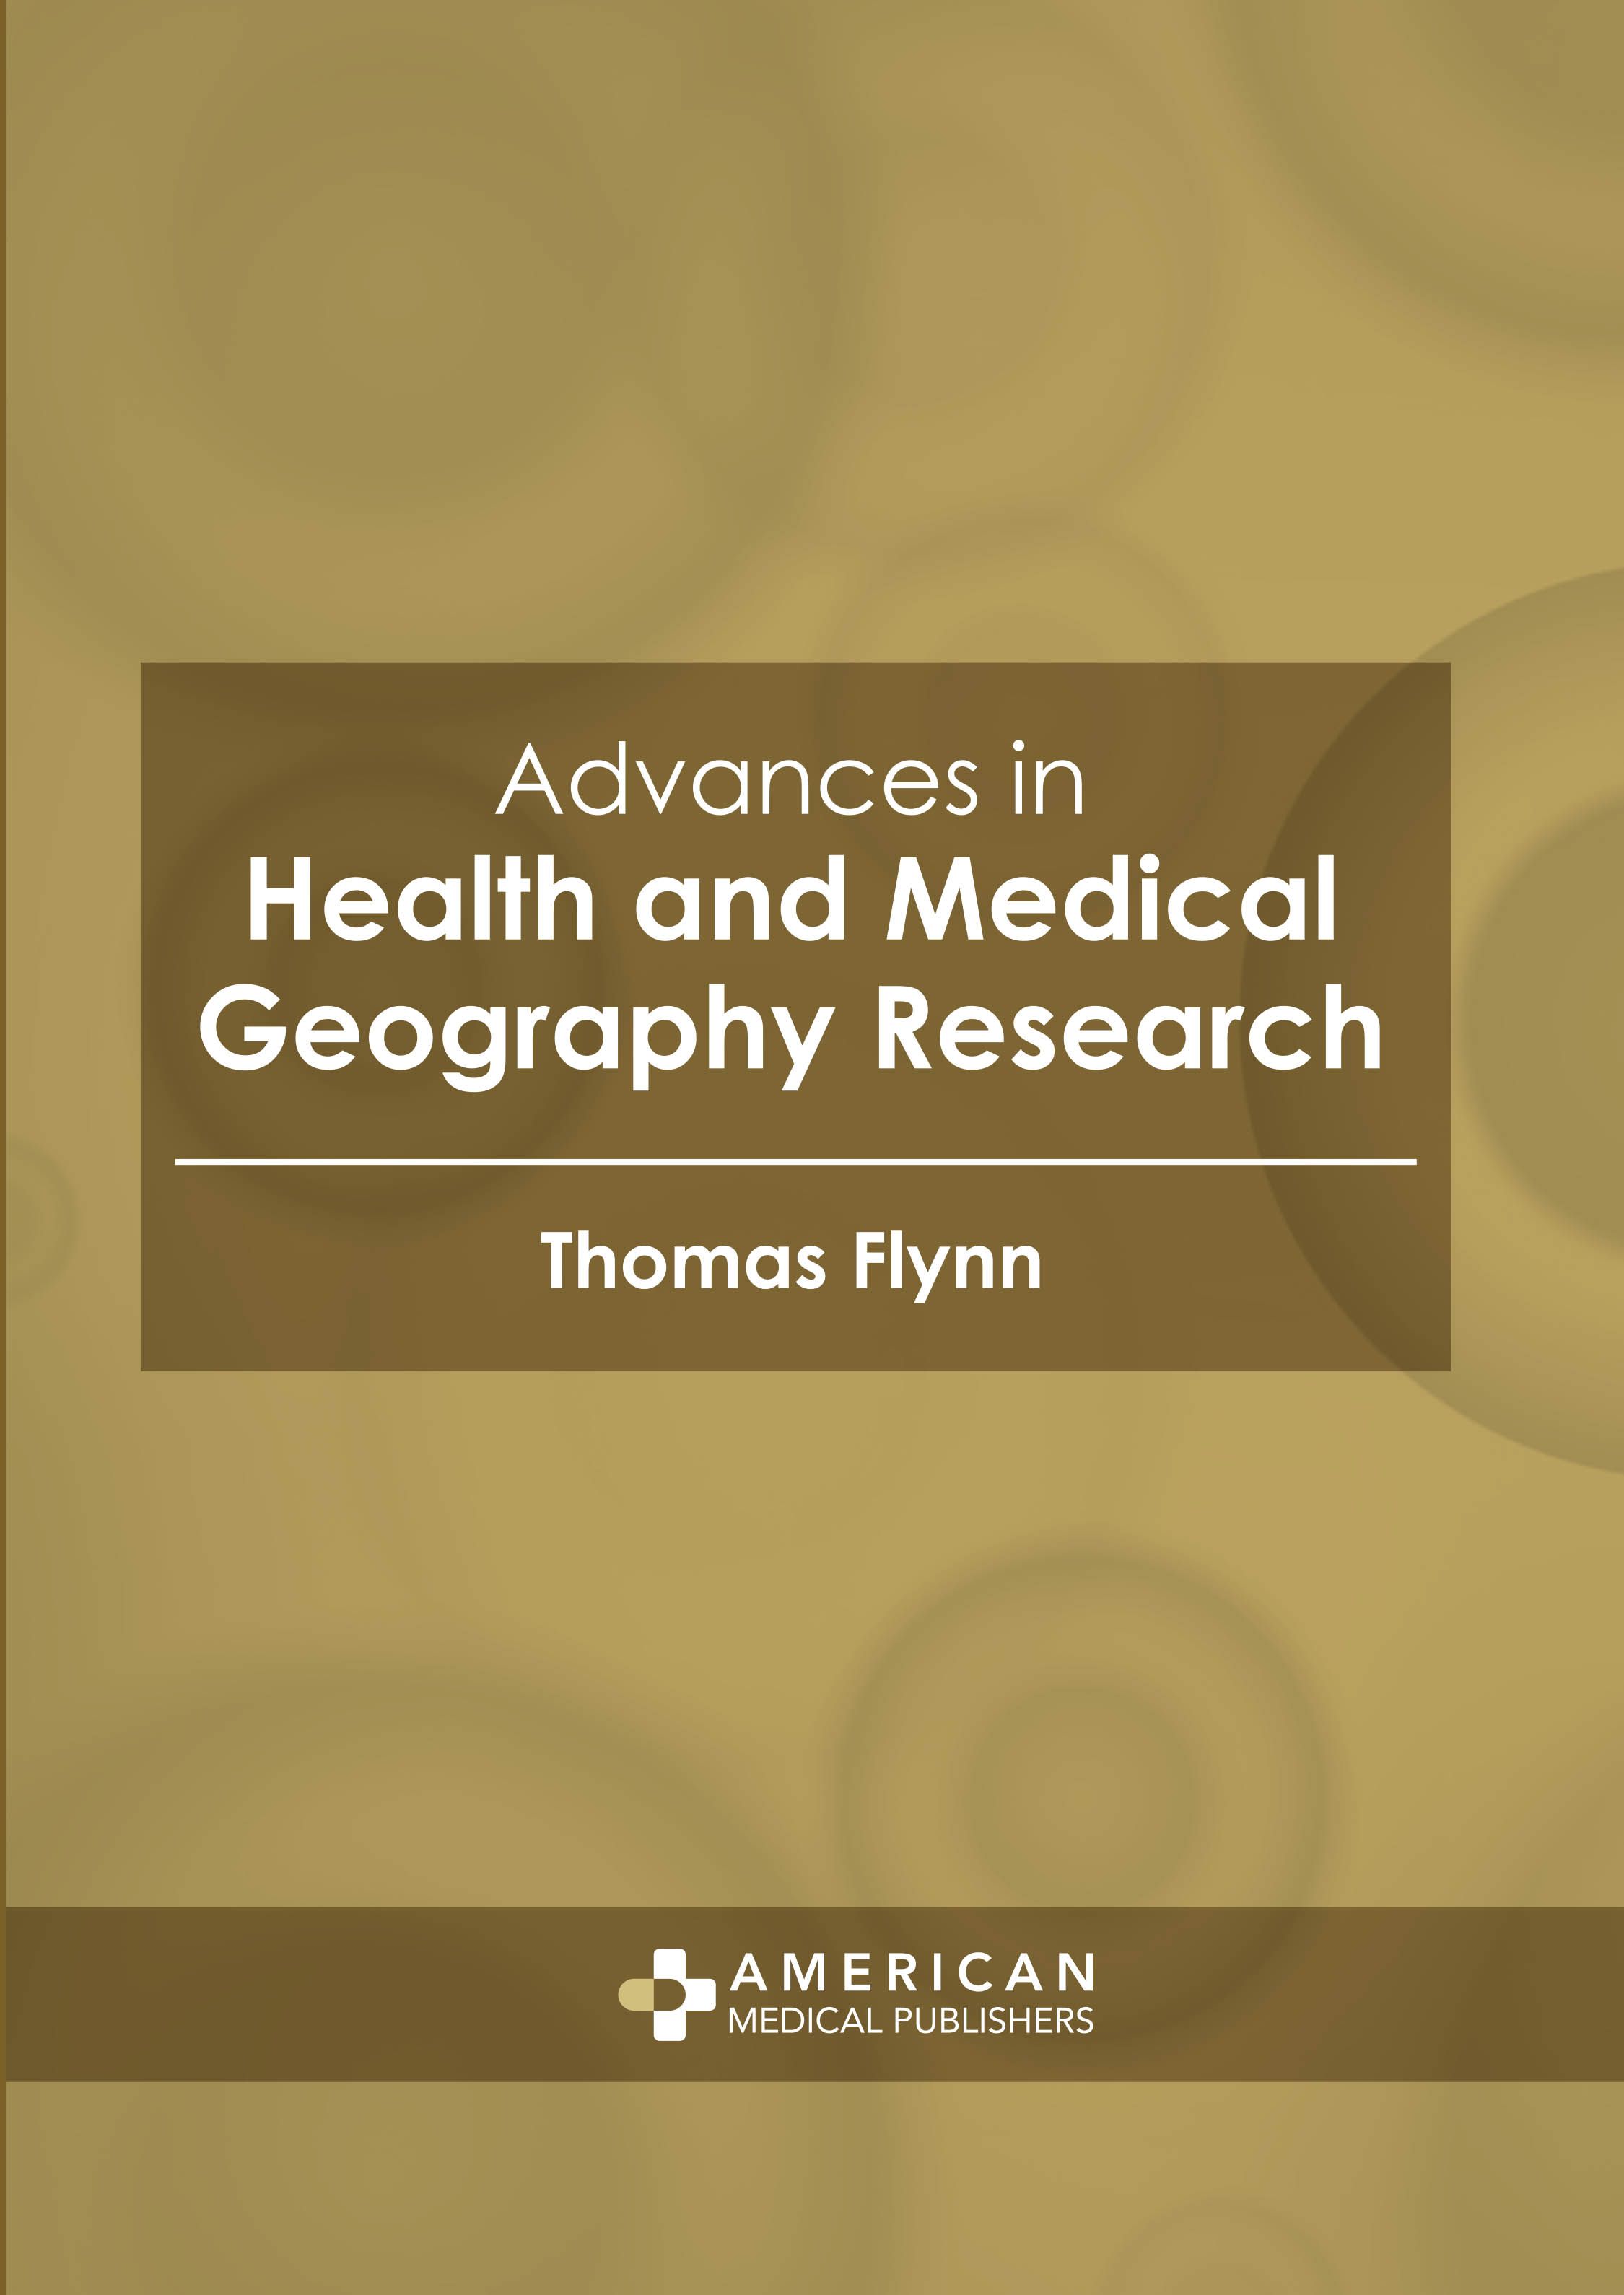 

exclusive-publishers/american-medical-publishers/advances-in-health-and-medical-geography-research-9781639271689